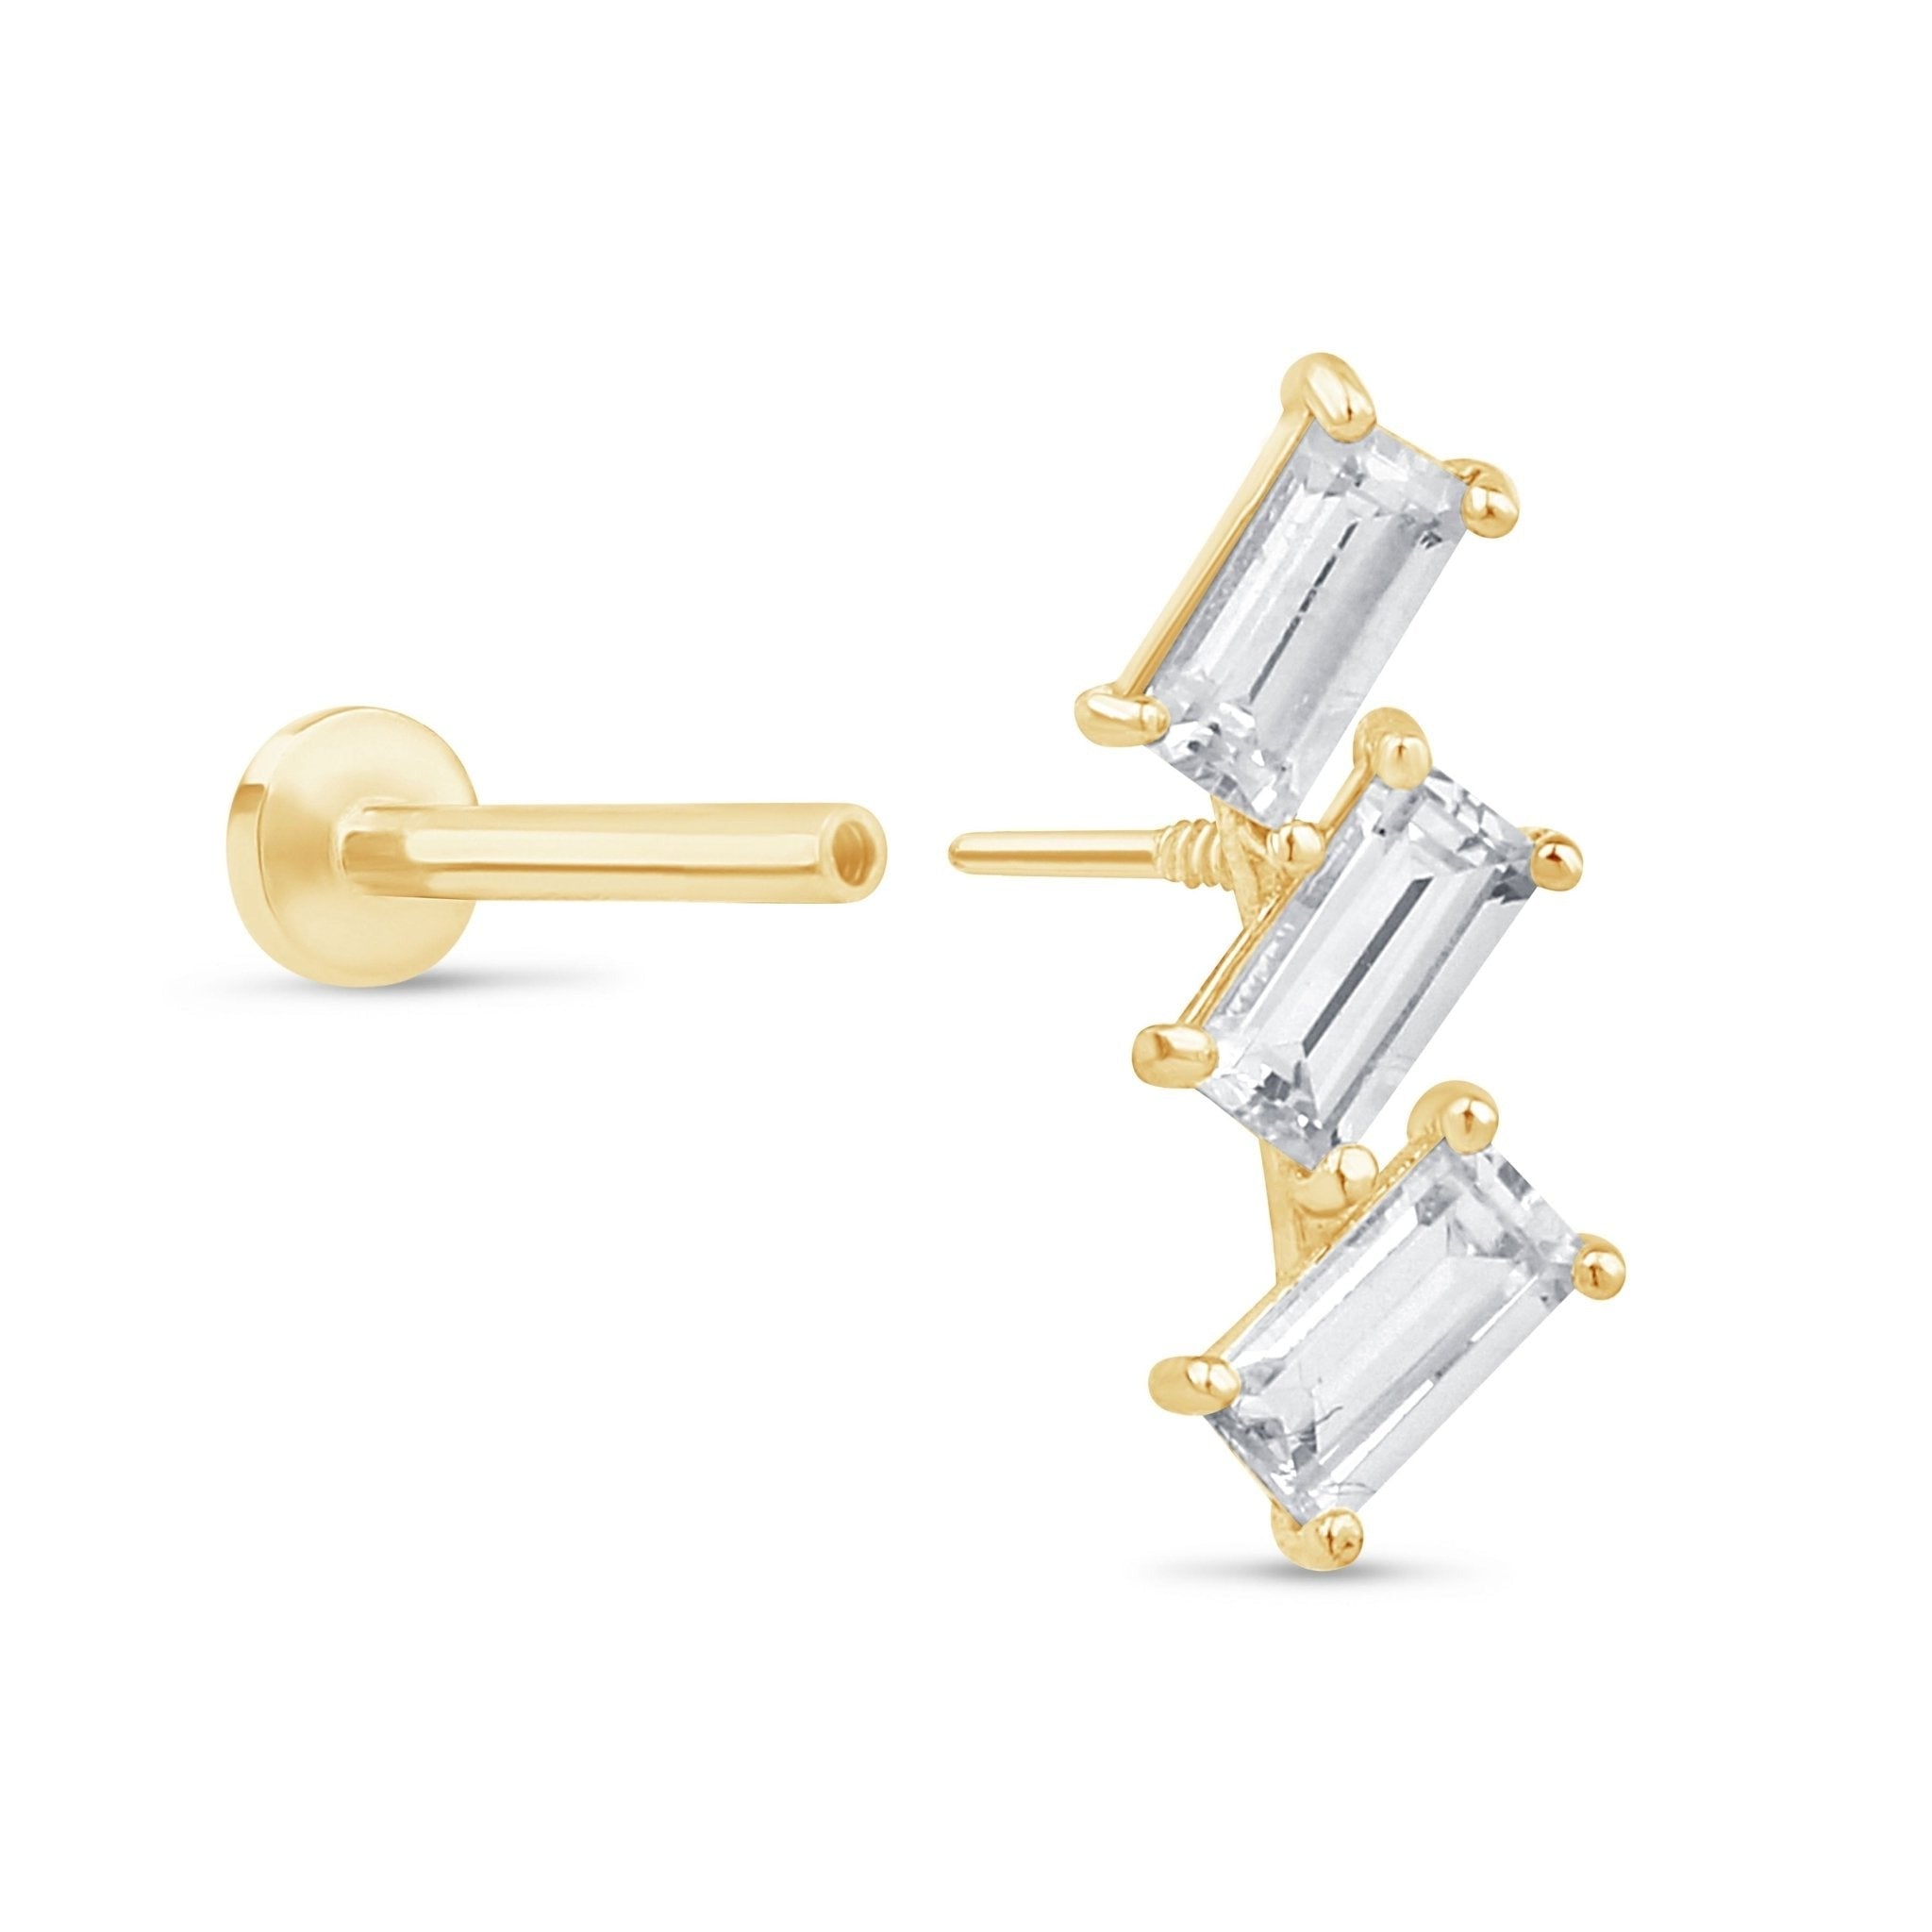 Chic Baguette Cascade Drop Earring in 14k Solid Yellow Gold Earrings Estella Collection #product_description# 18598 new New Arrivals test test mechanic #tag4# #tag5# #tag6# #tag7# #tag8# #tag9# #tag10#